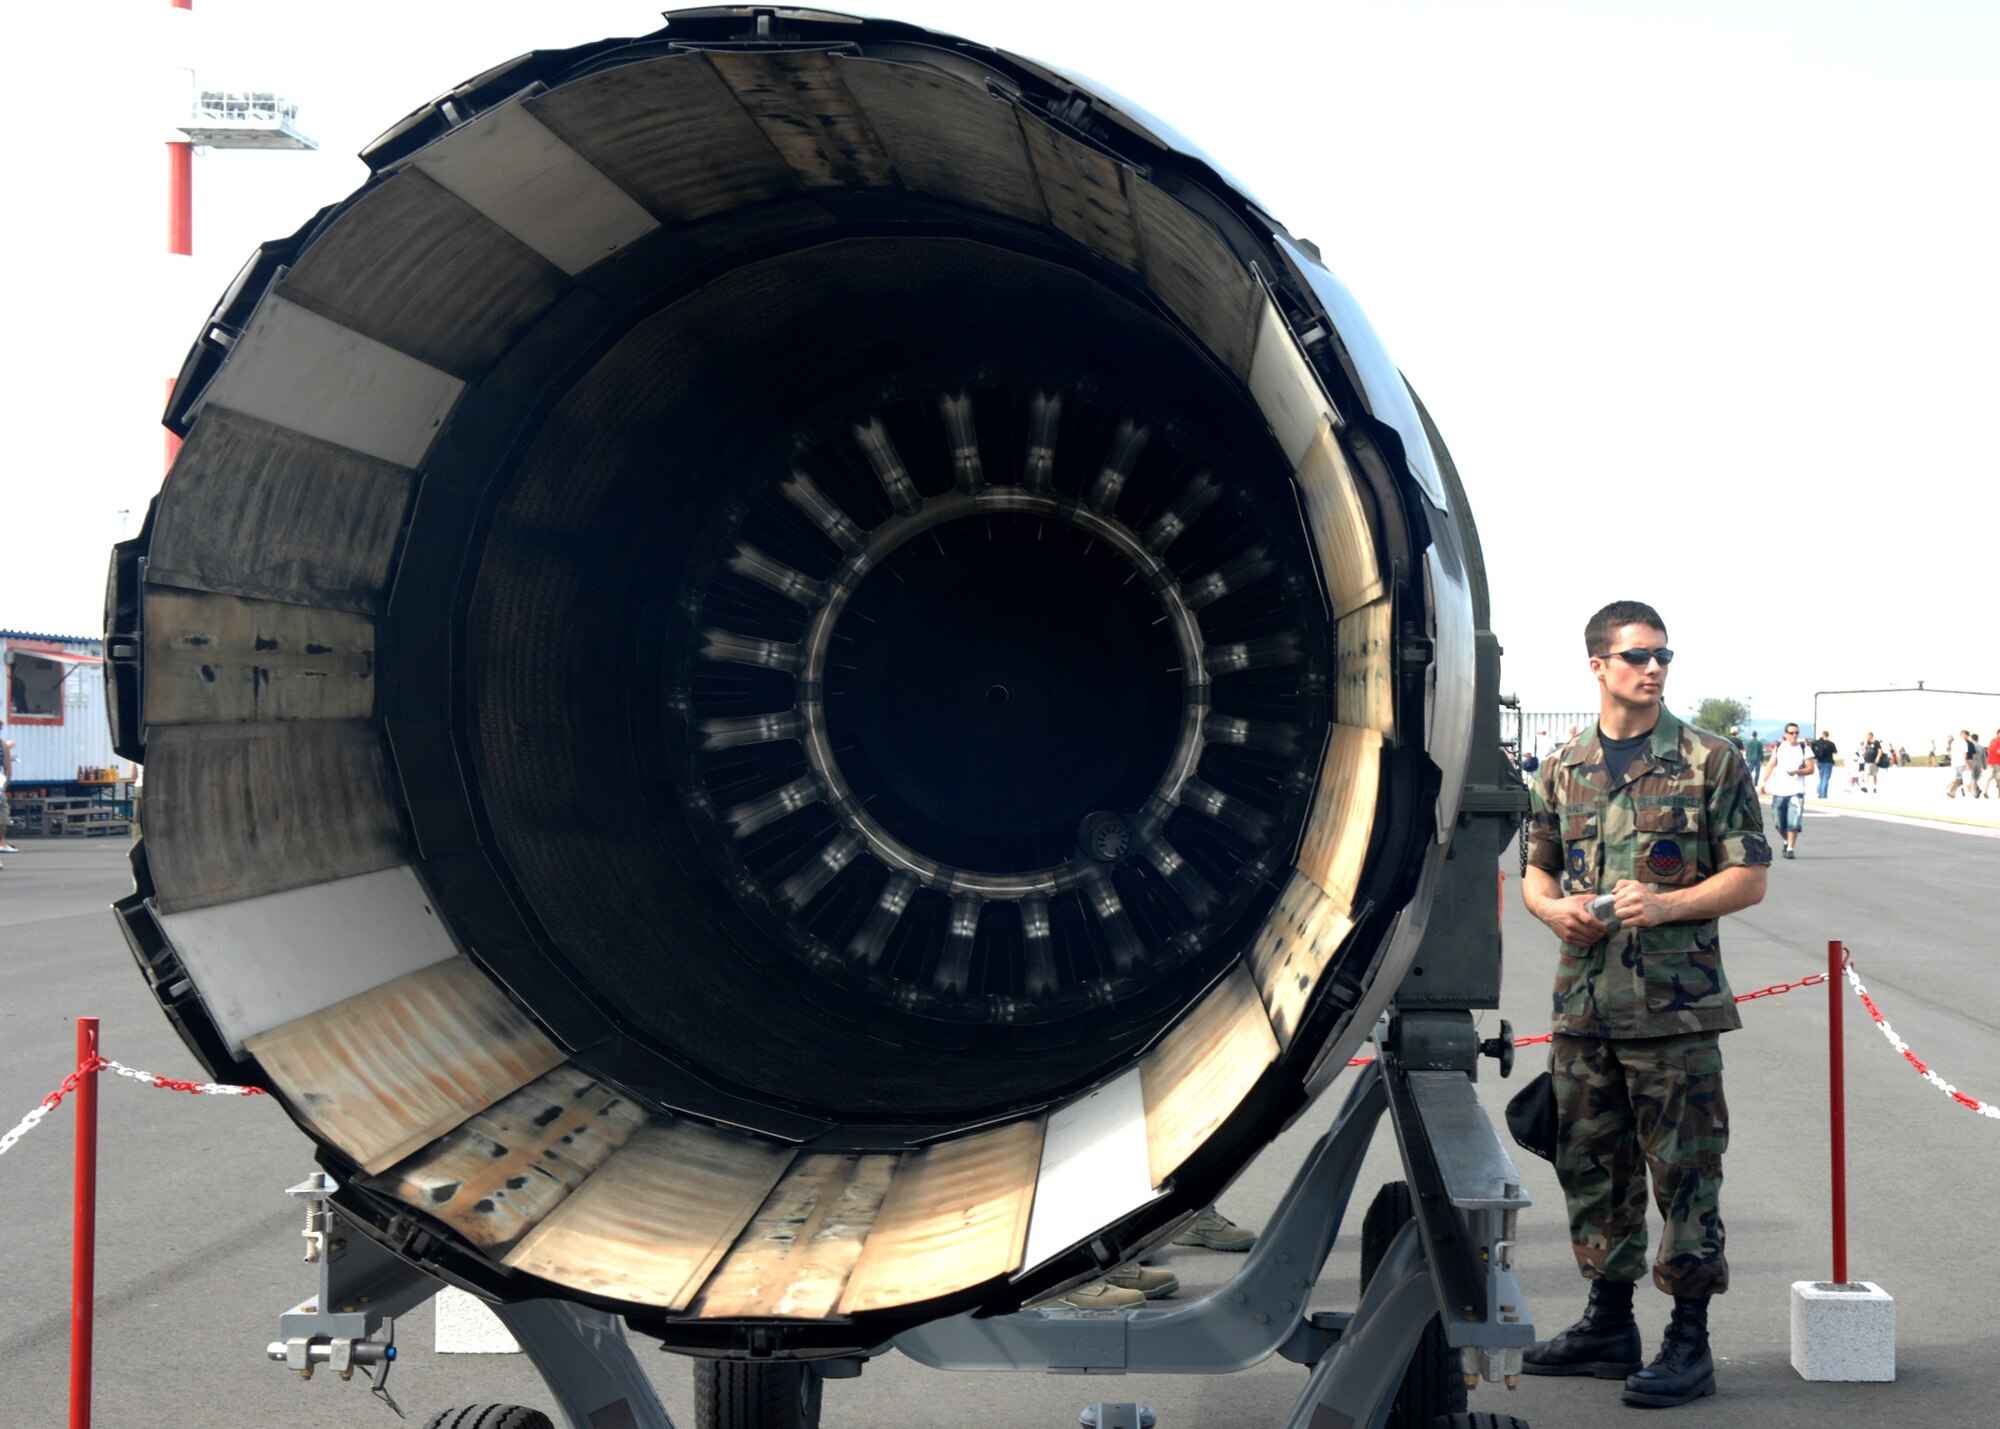 SPANGDAHLEM AIR BASE, Germany – Airman Christian Davey, 52nd Component Maintenance Squadron, stands ready to explain the General Electric 129 F-16 jet engine to interested visitors during the Open House, July 26, 2008. (U.S. Air Force photo by Airman Staci Miller)